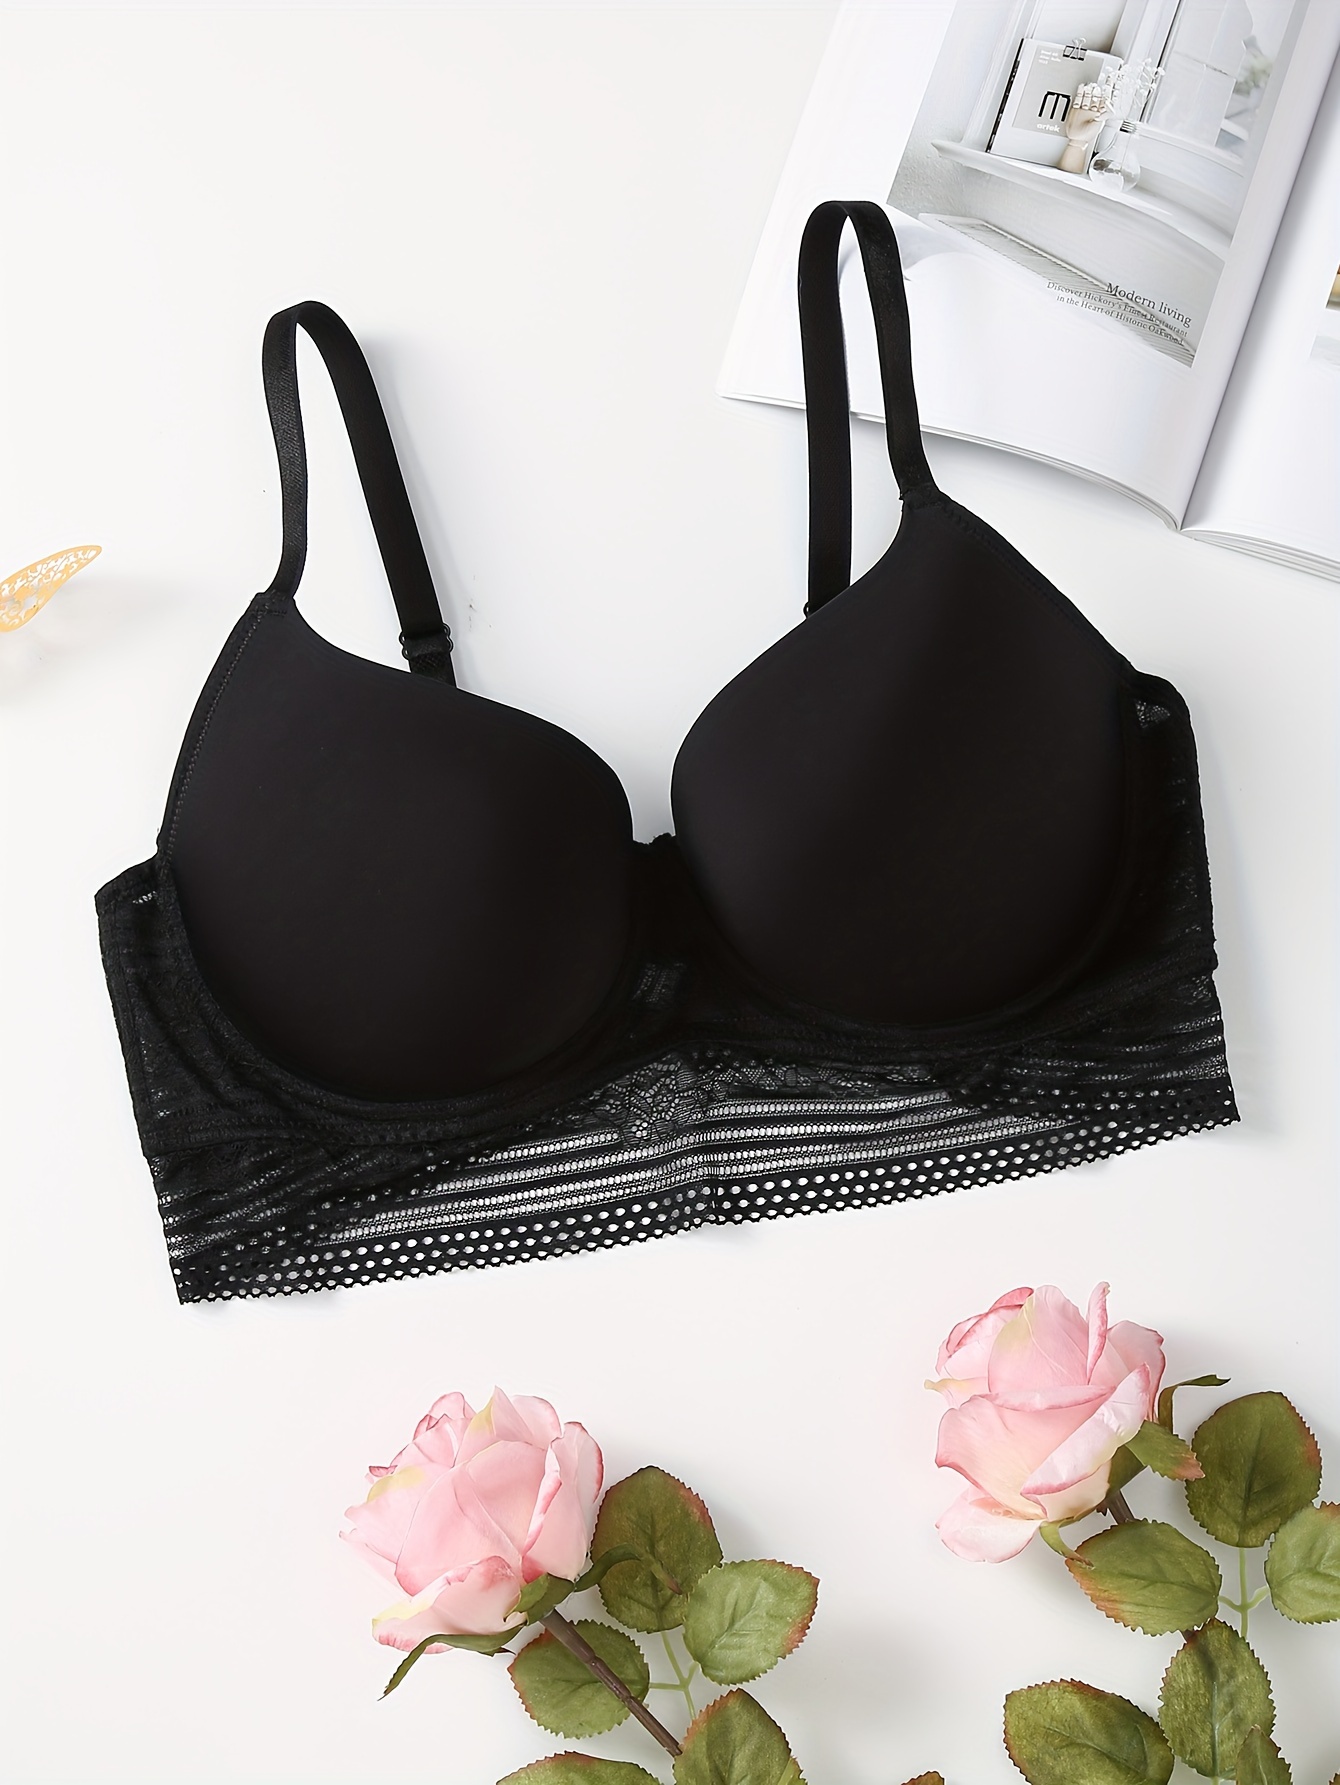 Plusgalpret Sexy Lace Bra Liners For Women Plus Size 85 110, Large Cup, D D  E, Full Cup Bra Linerssiere, Unlined BW 211110 From Dou04, $5.49